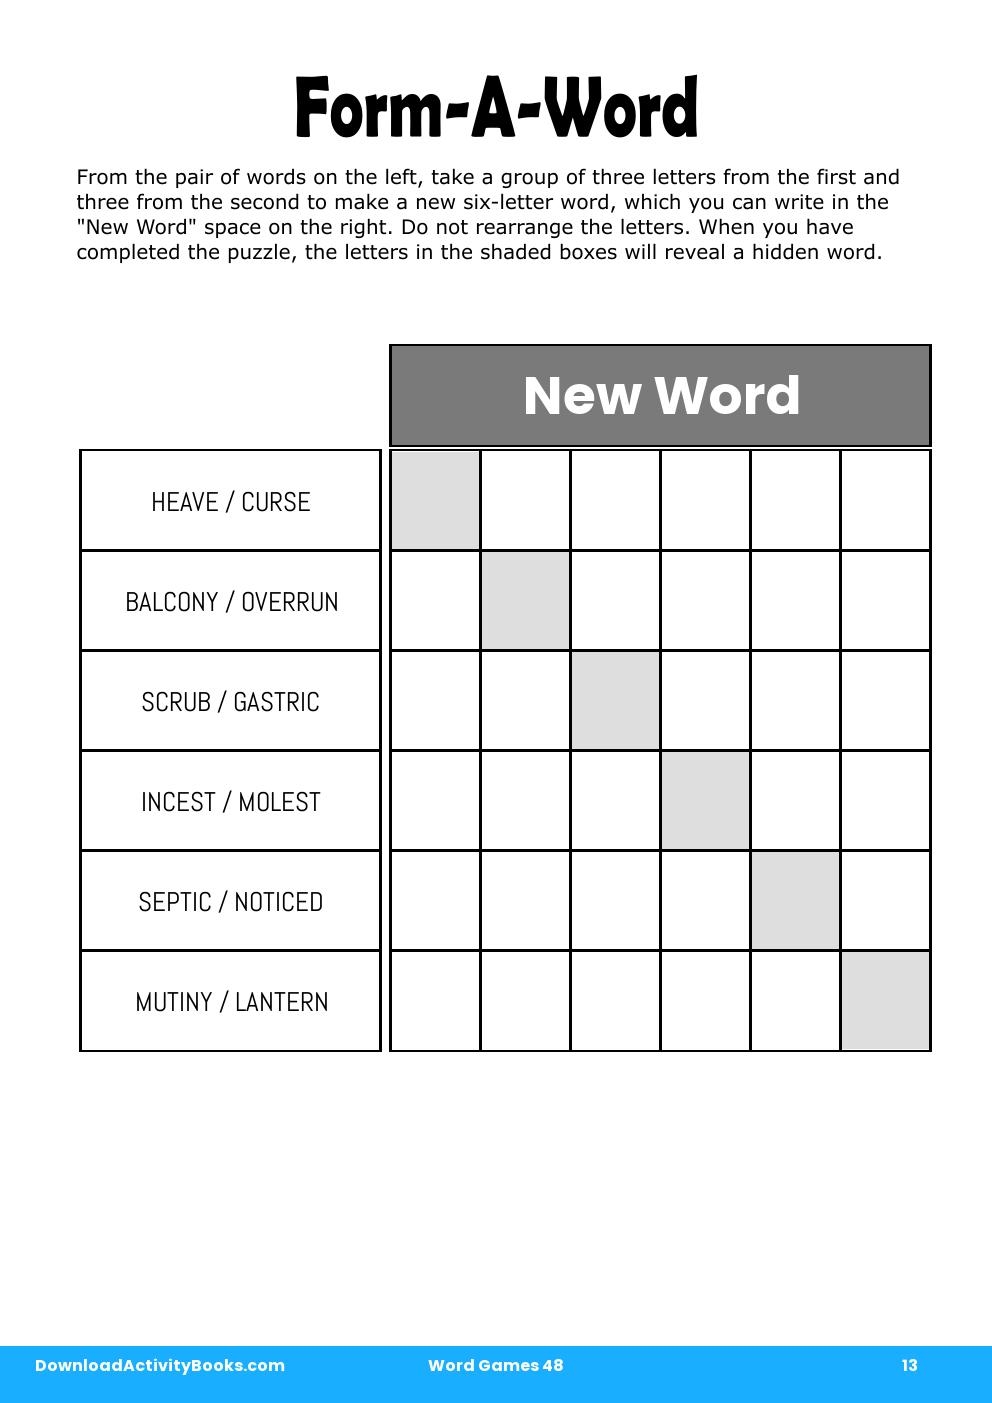 Form-A-Word in Word Games 48